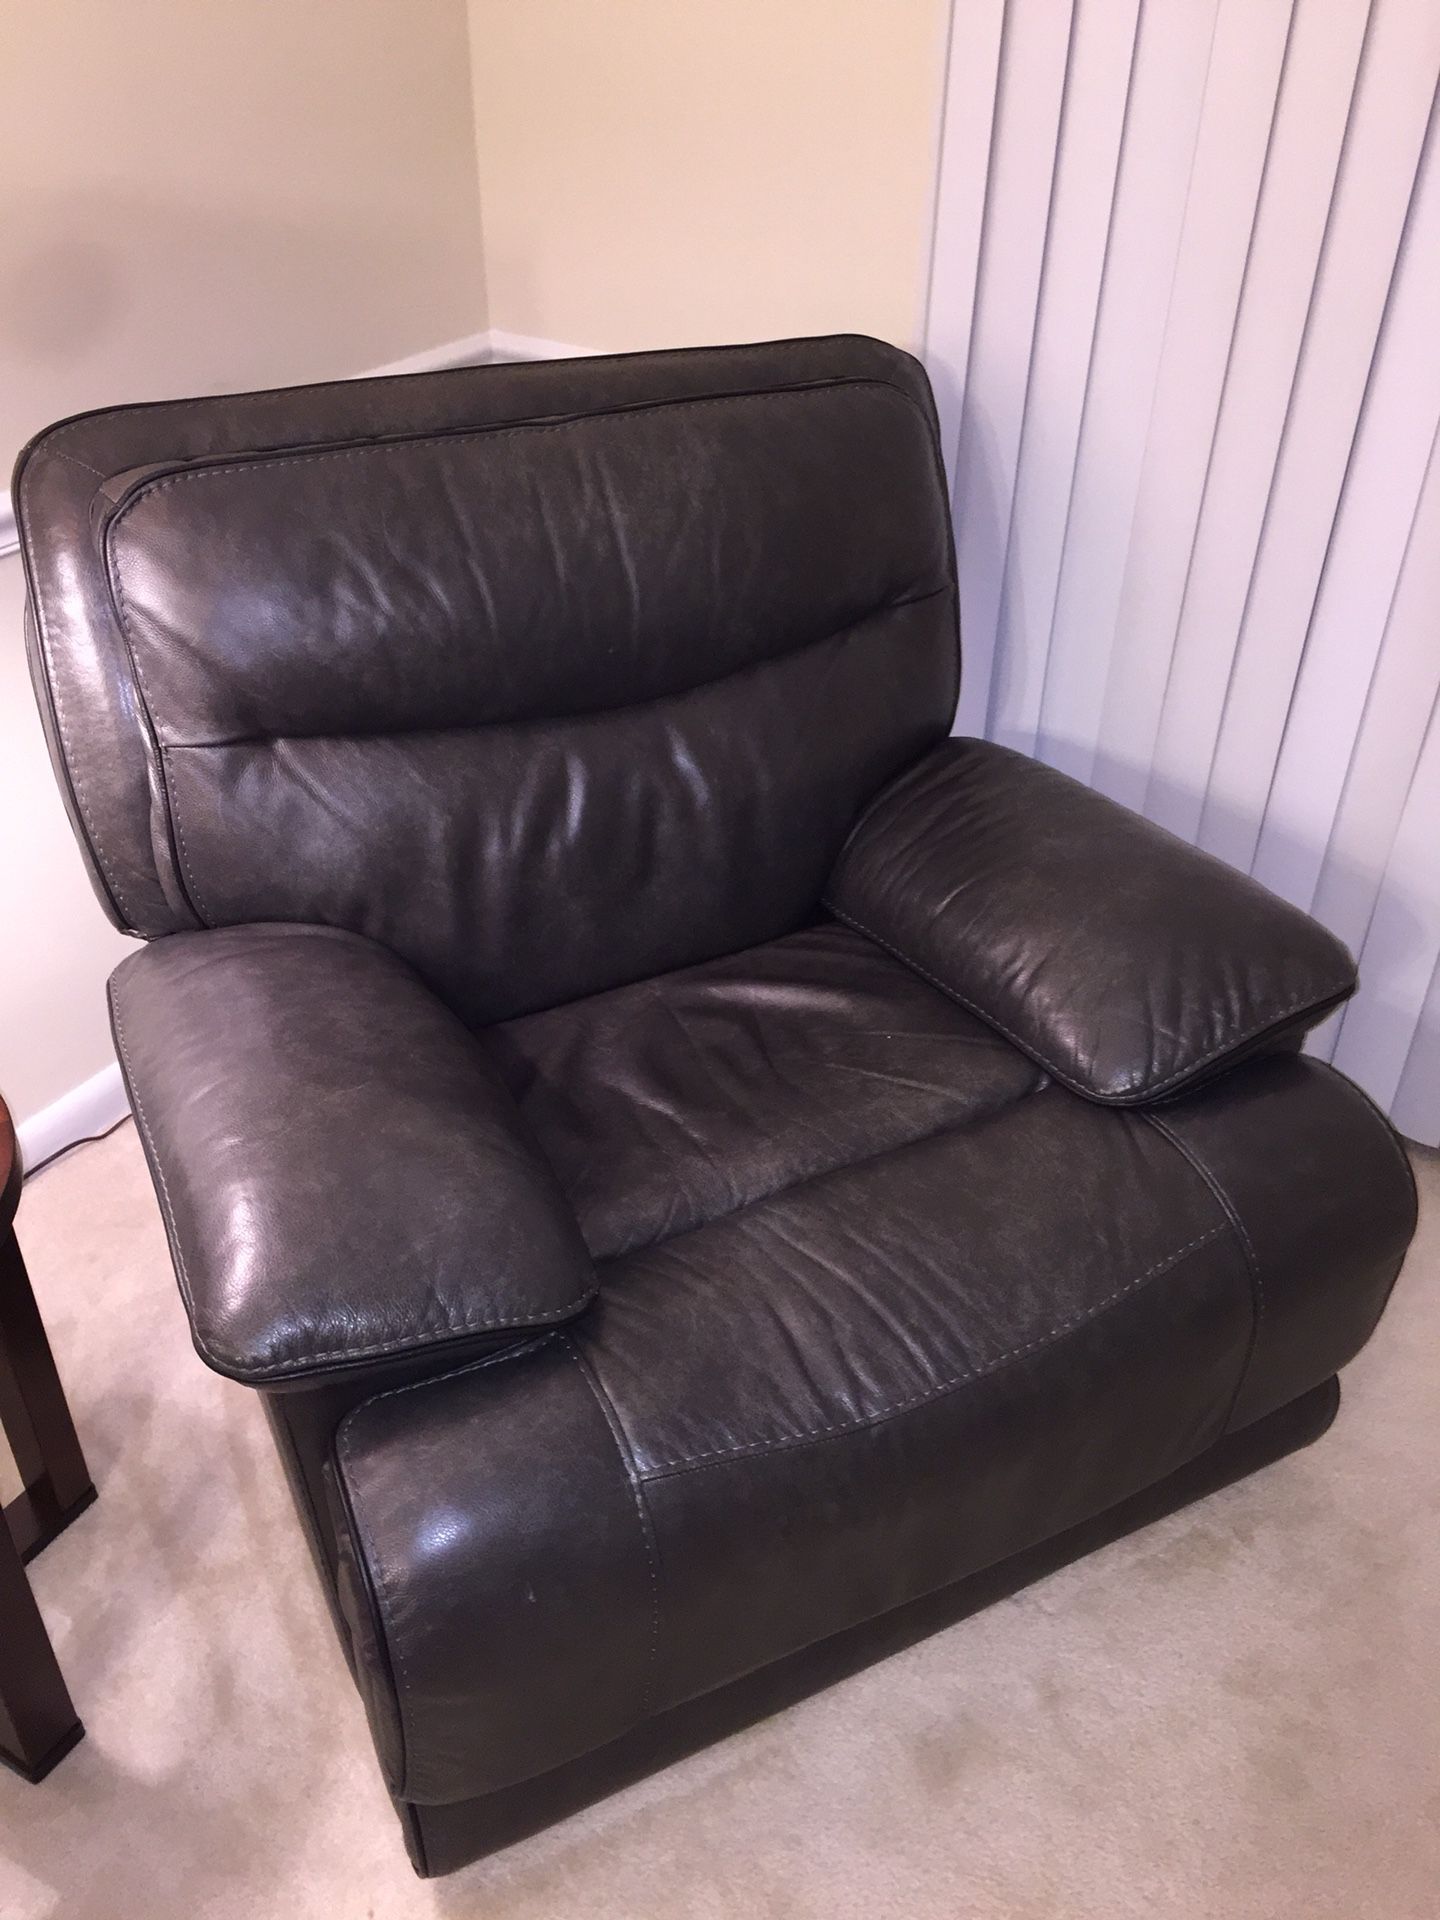 Reclining Chair - Excellent condition!!!